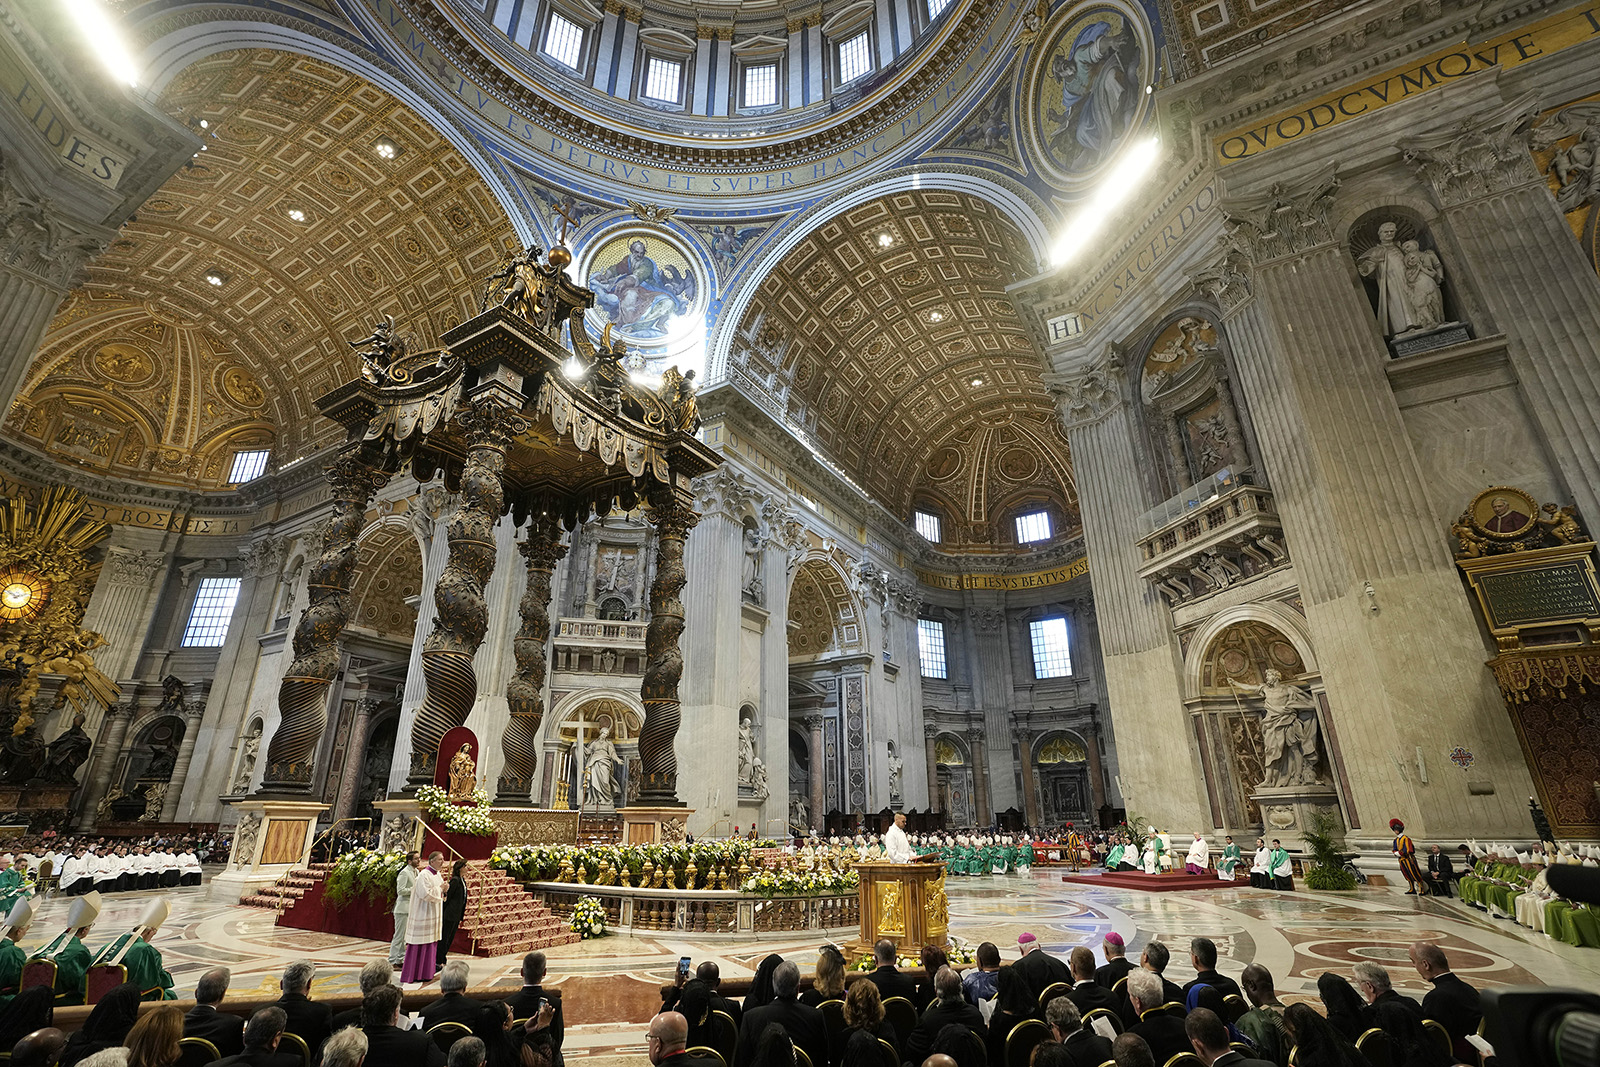 Pope Francis presides over a Mass for the closing of the 16th General Assembly of the Synod of Bishops, in St.Peter’s Basilica at the Vatican, Oct. 29, 2023. (AP Photo/Alessandra Tarantino)